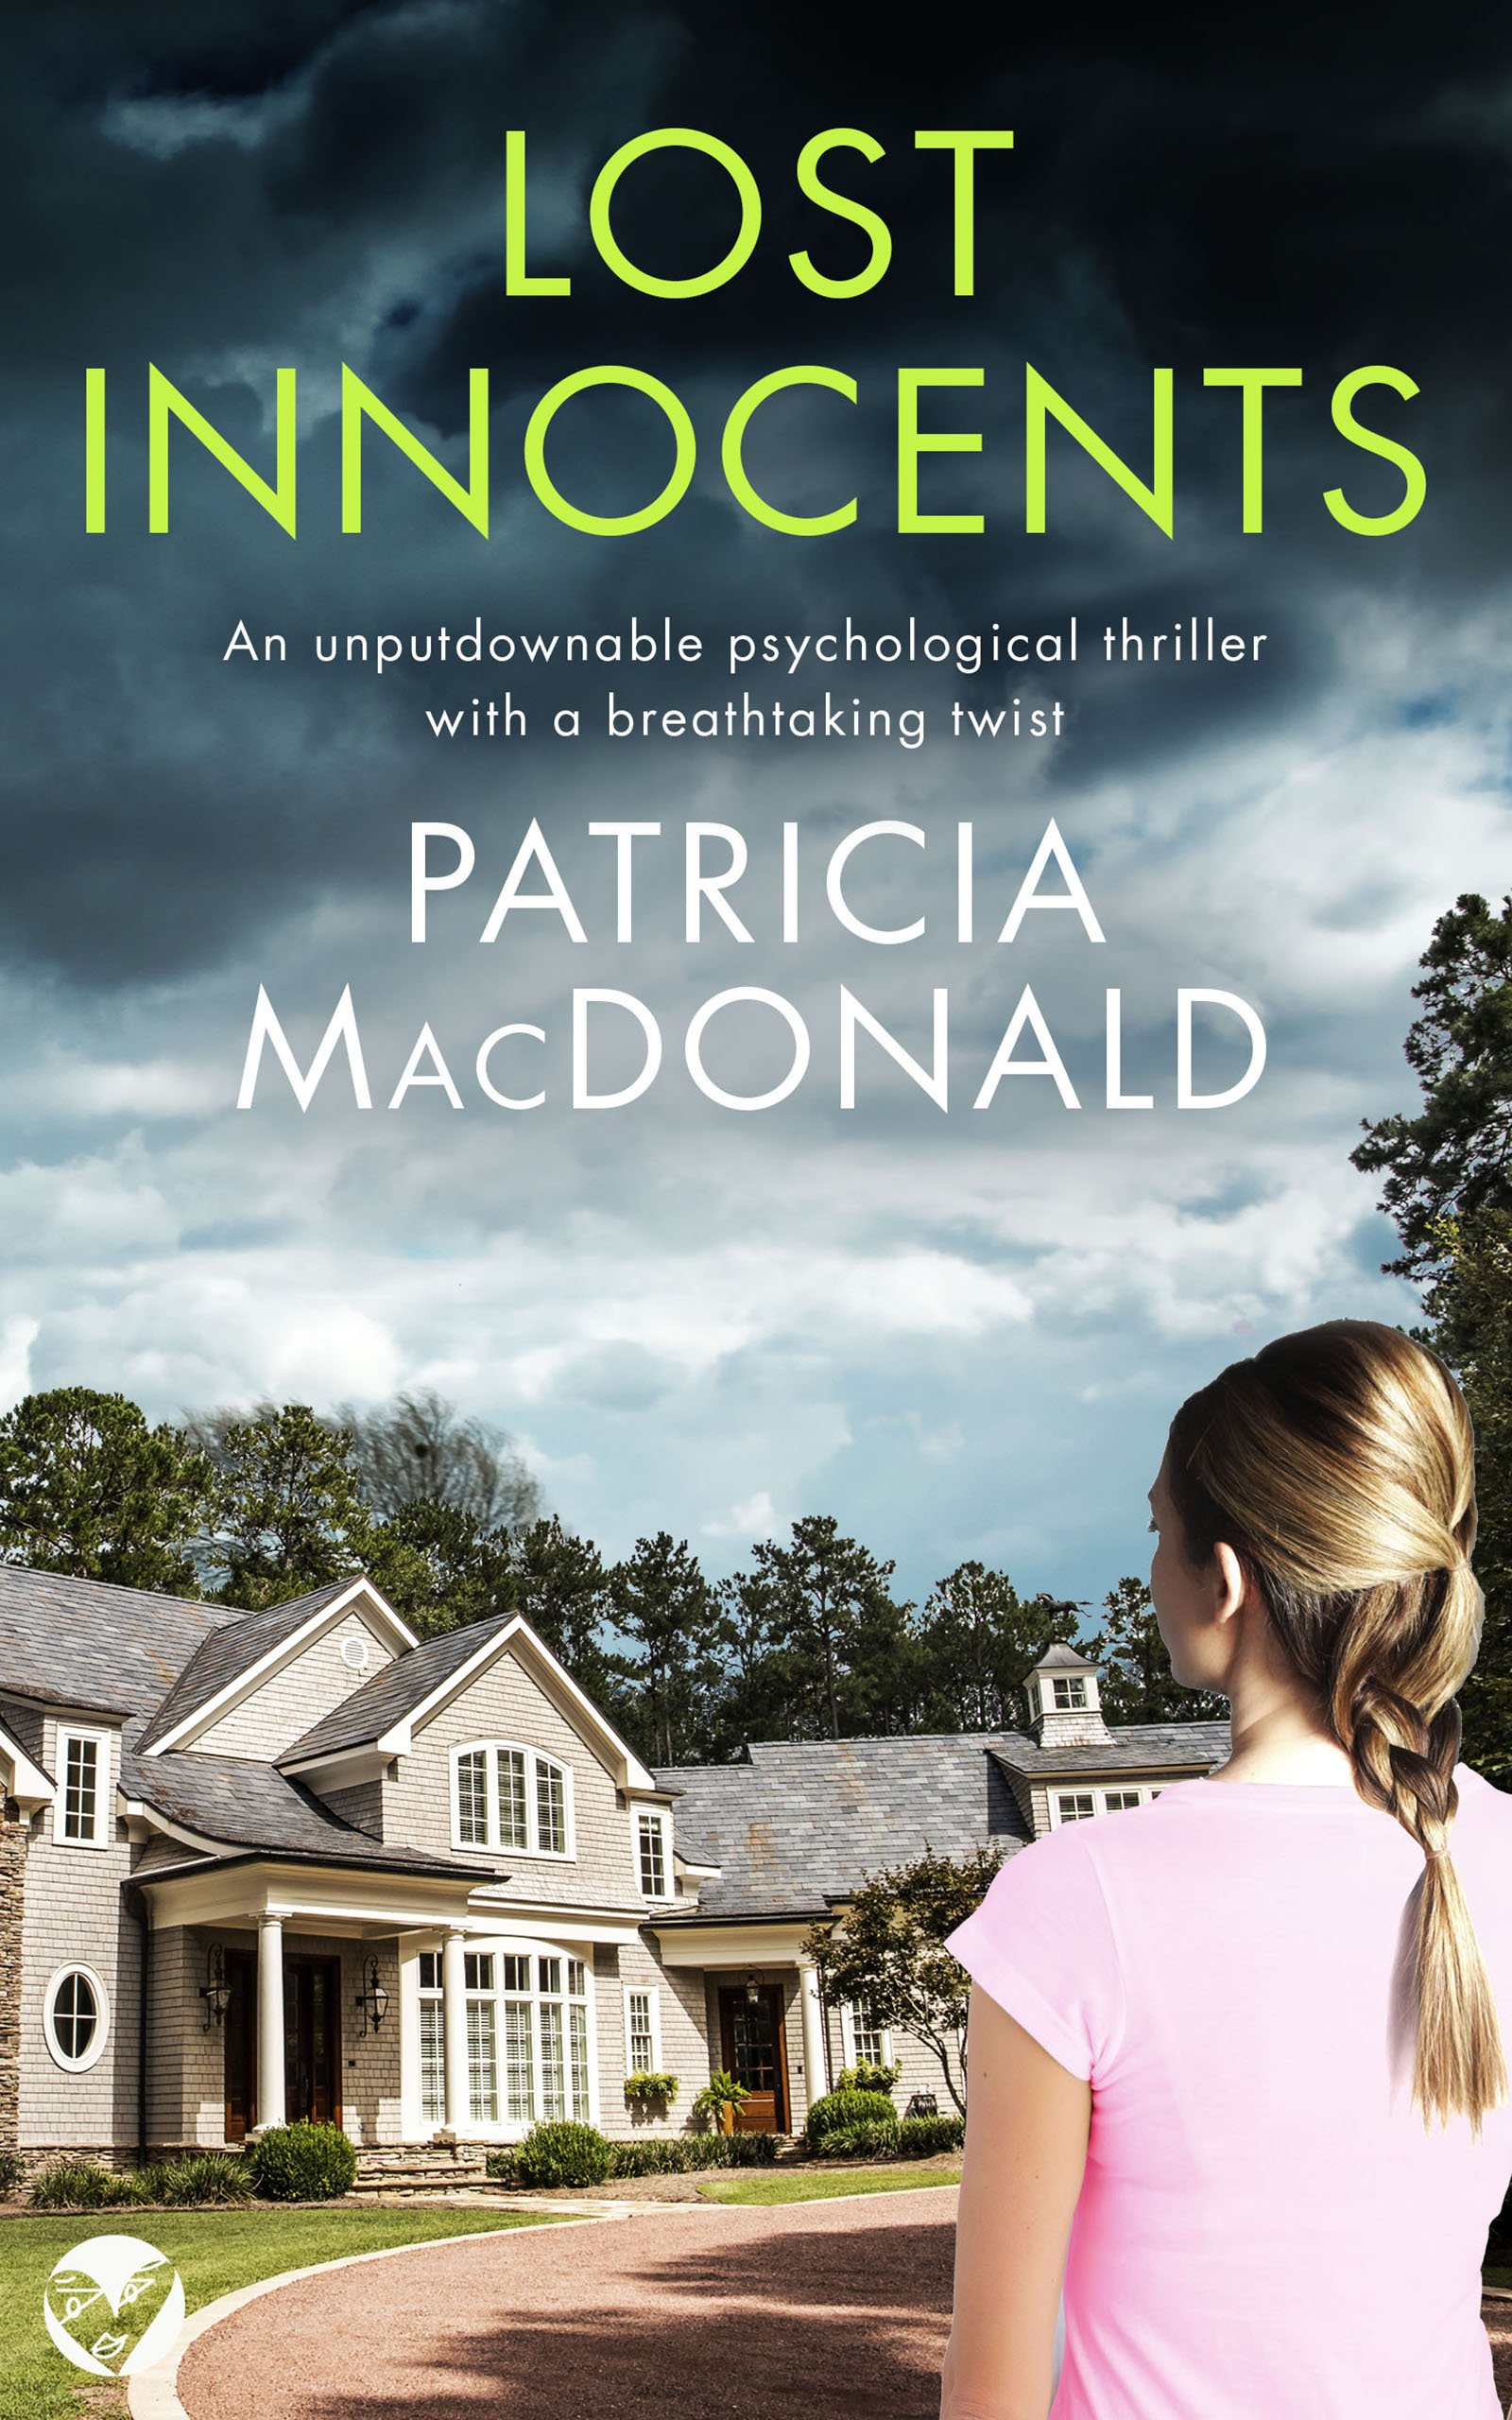 LOST INNOCENTS Cover publish.jpg